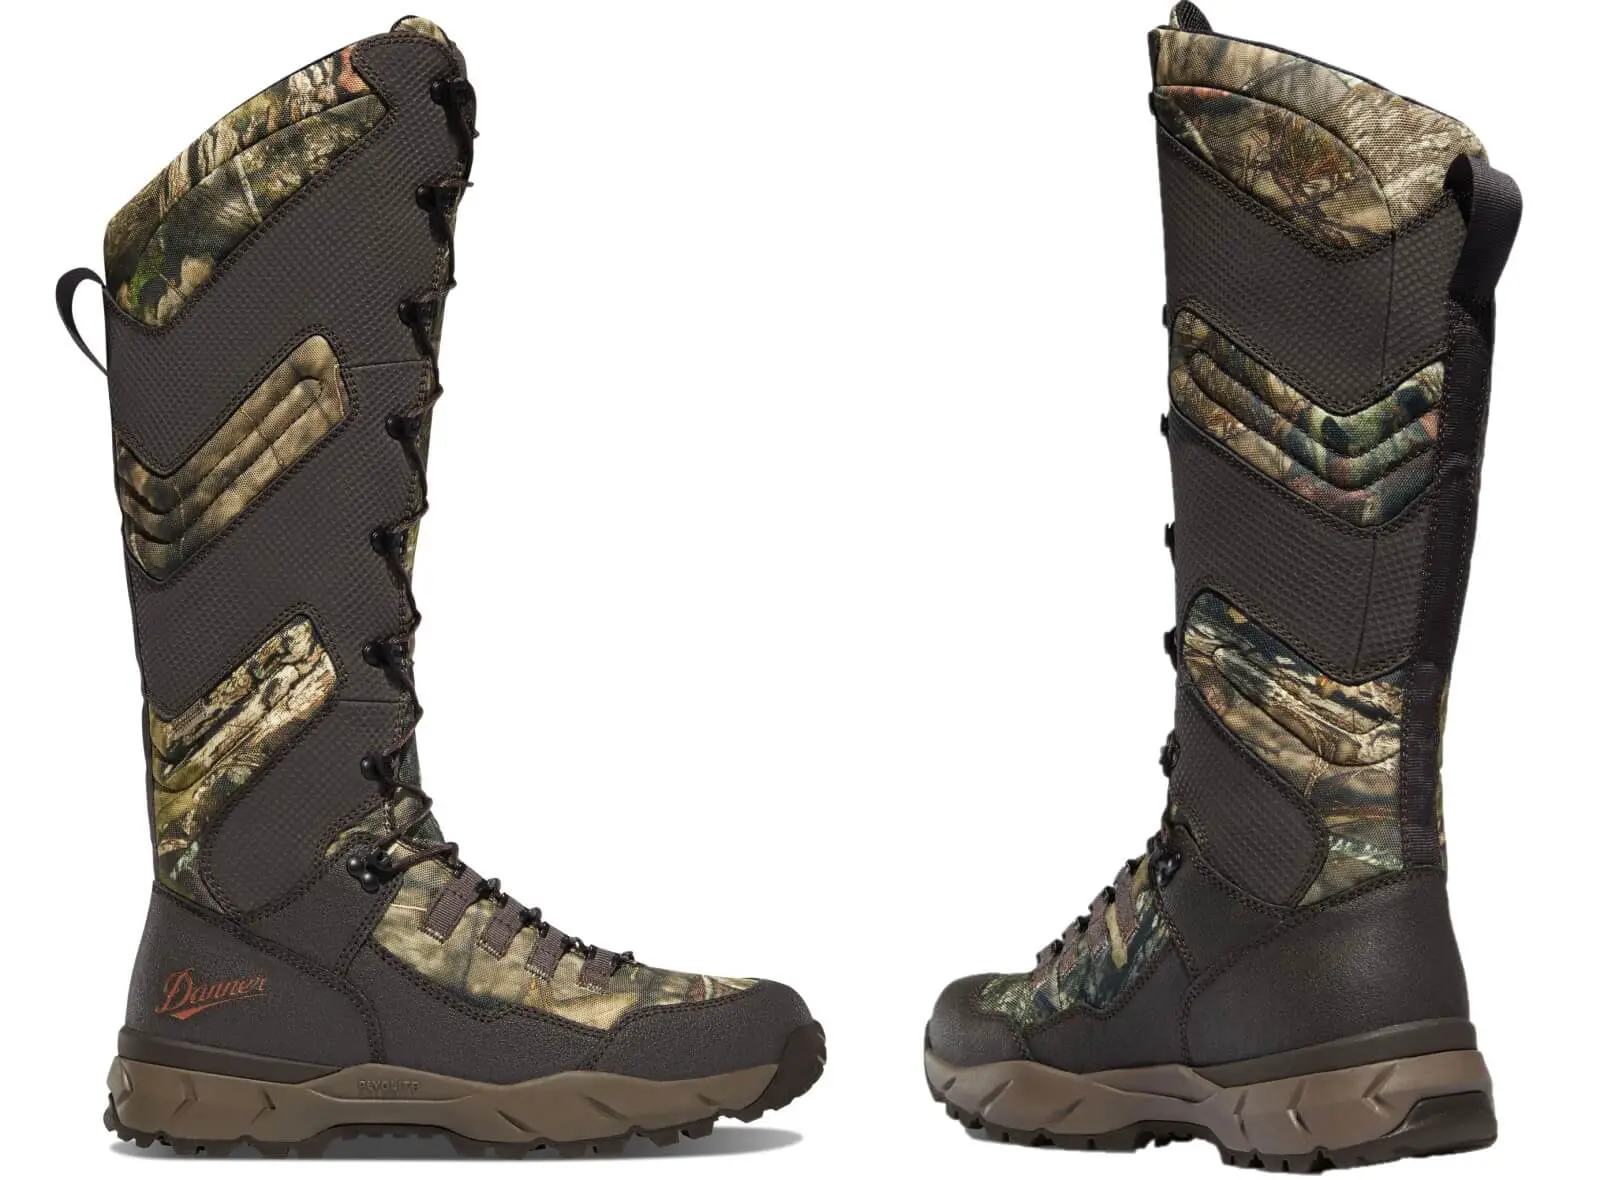 Danner Vital Snake Boot Review – Solid Choice for